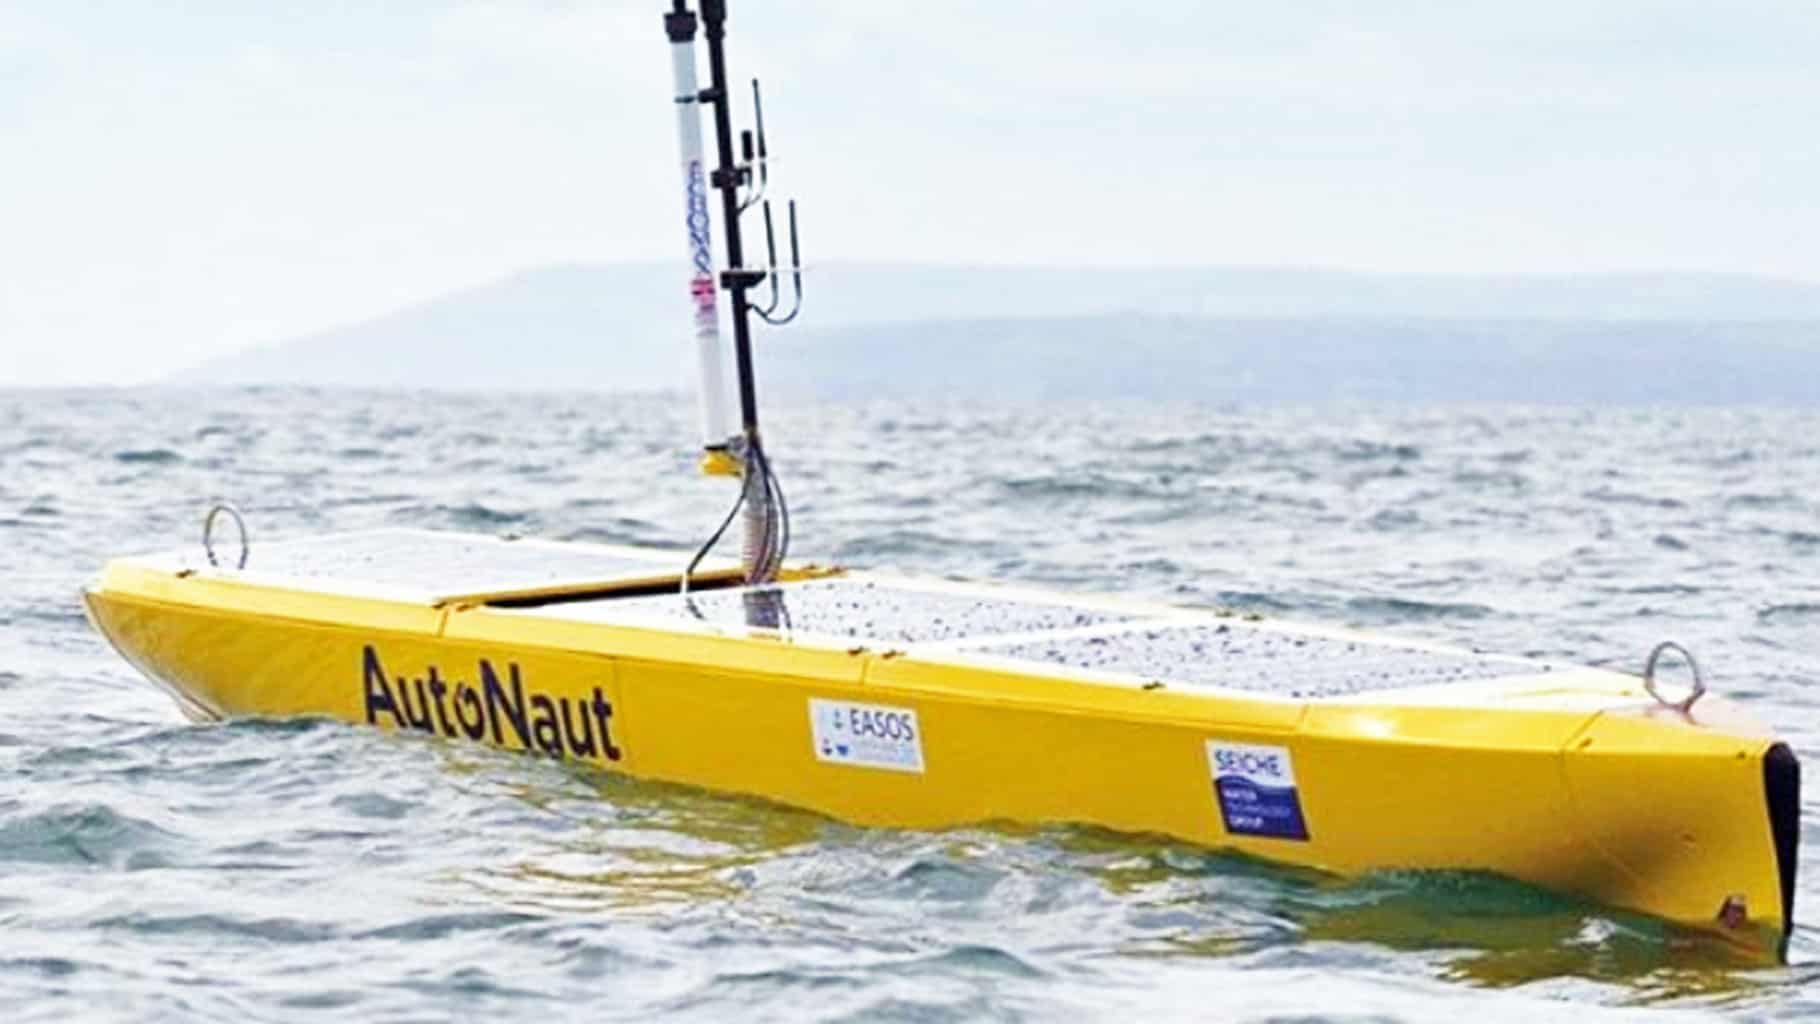 Low-power, long-endurance autonomy might find takers in the maritime industry (Photo: Autonaut)